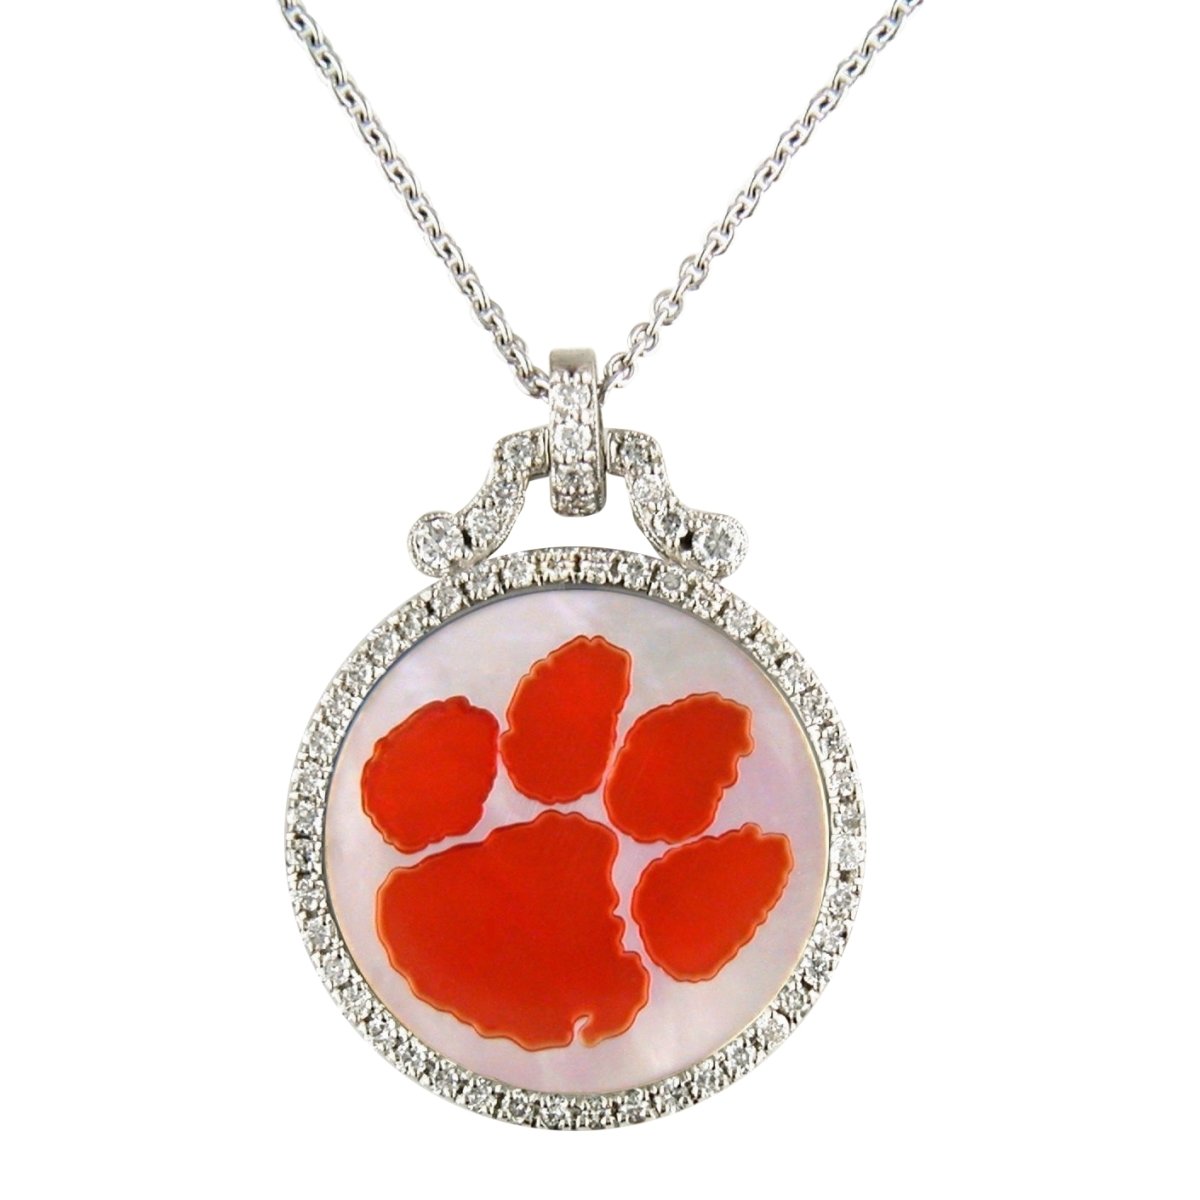 Argent Sport Clemson Tigers Diamond and Mother of Pearl Pendant Necklace - Mr. Knickerbocker